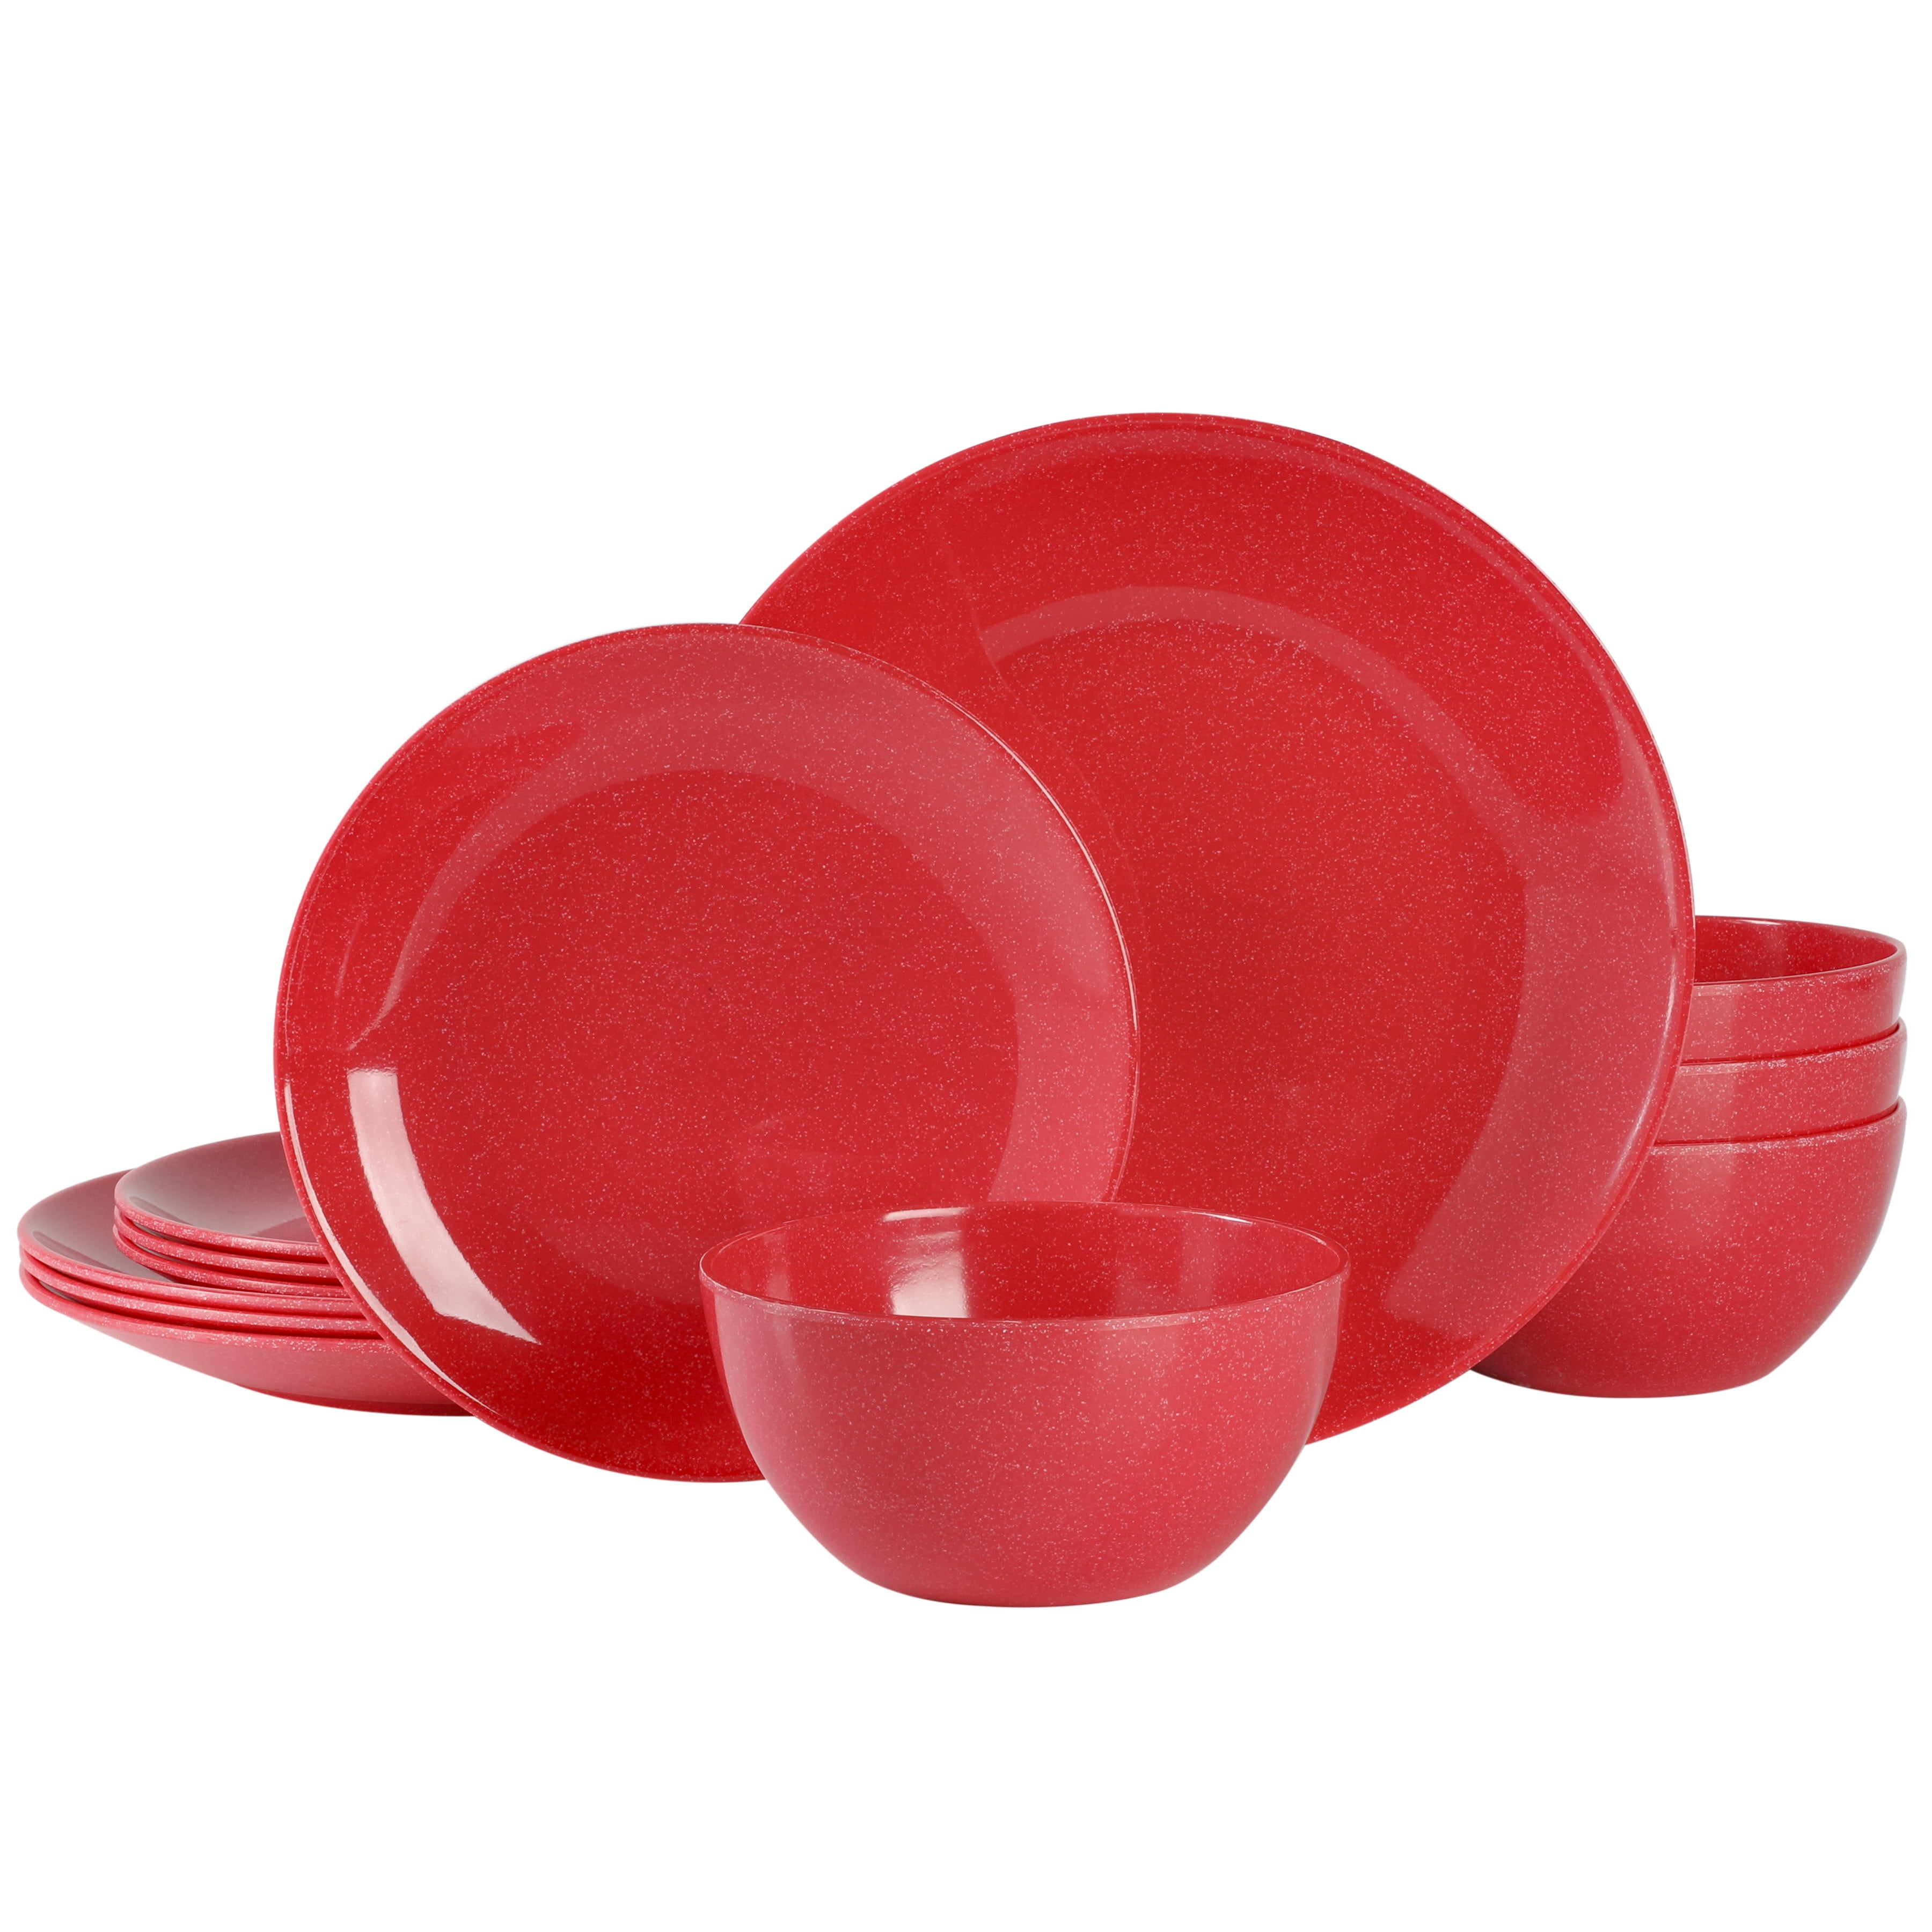 Red Martha Stewart Collection Set of Four Ramekins With Lids, Baking Pots,  Christmas, Holiday Red Dishes, Quiche, Crème Brûlée Dishes, 